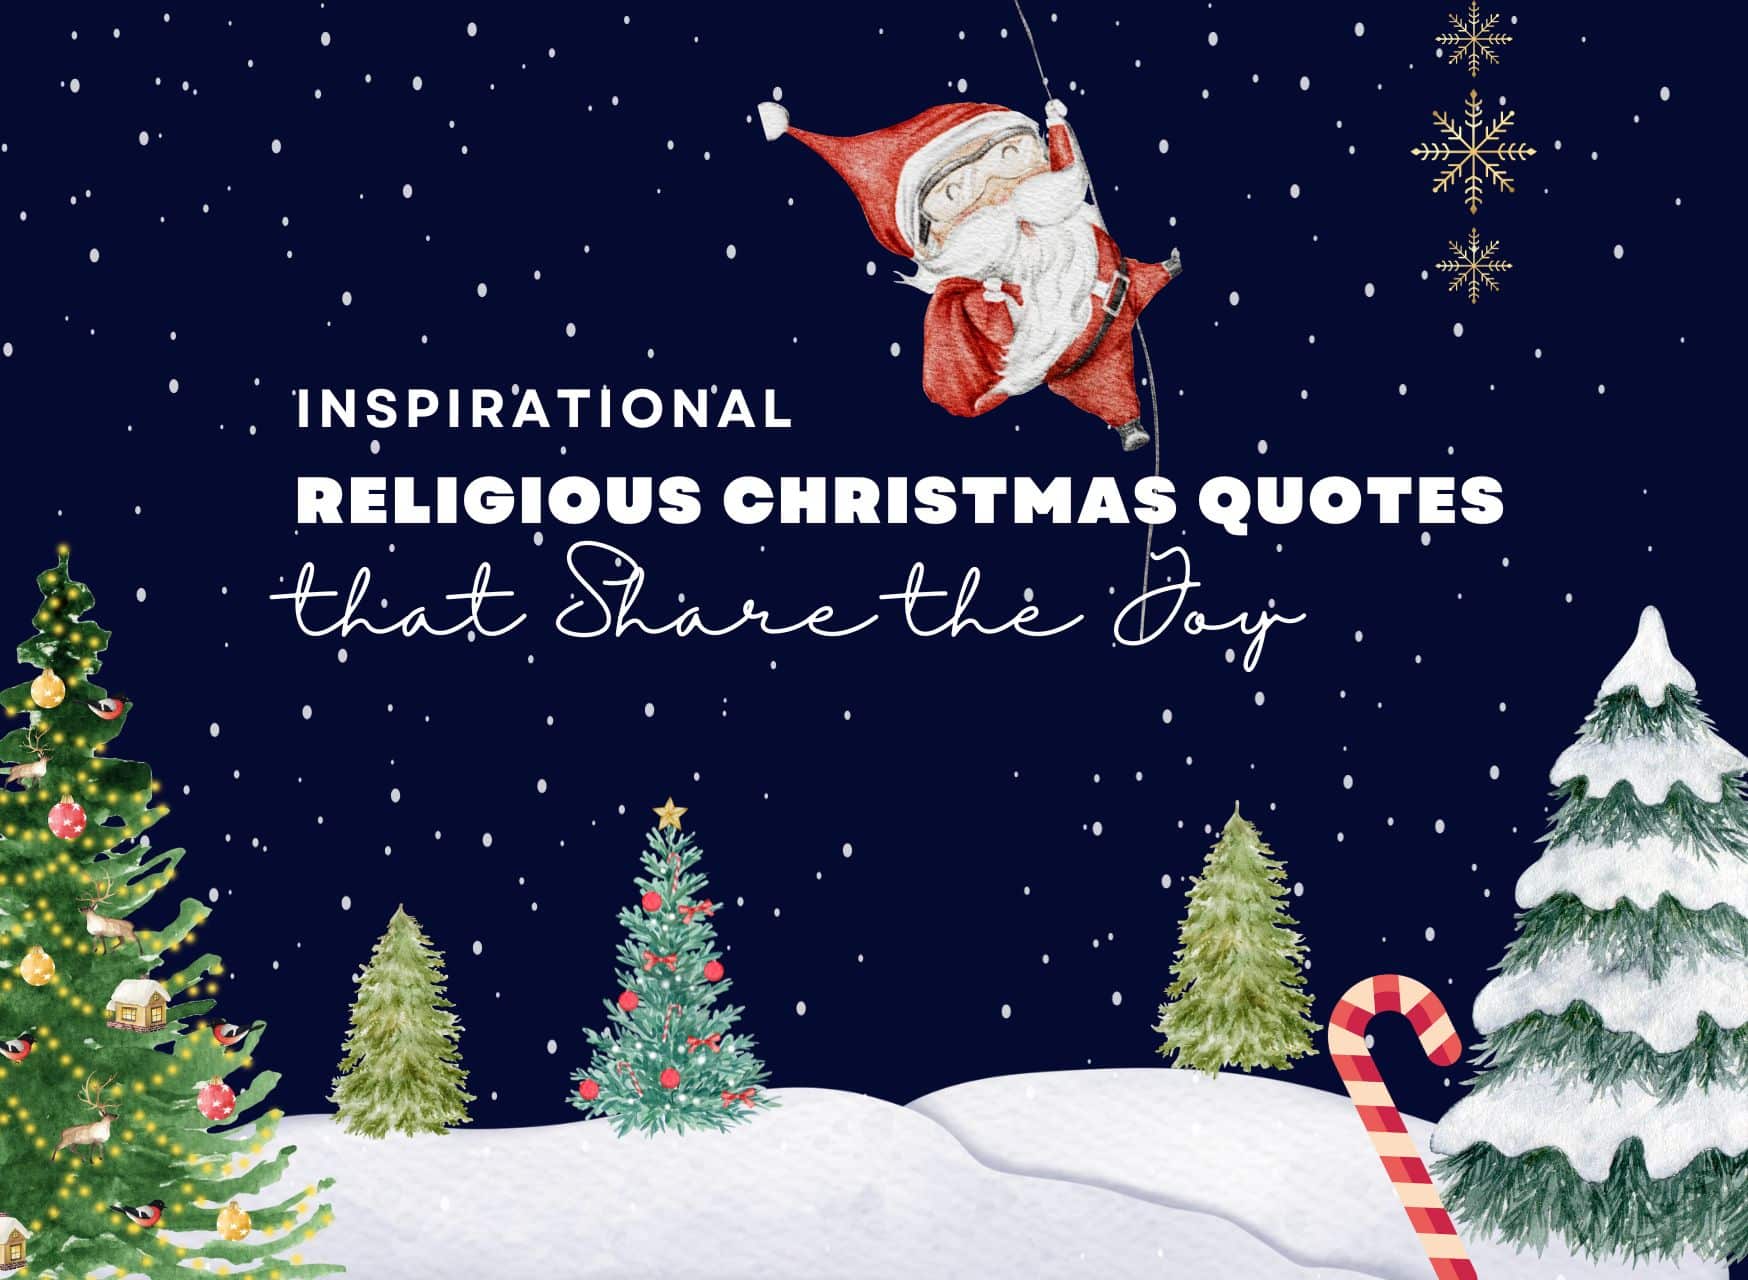 Inspirational Religious Christmas Quotes That Share The Joy